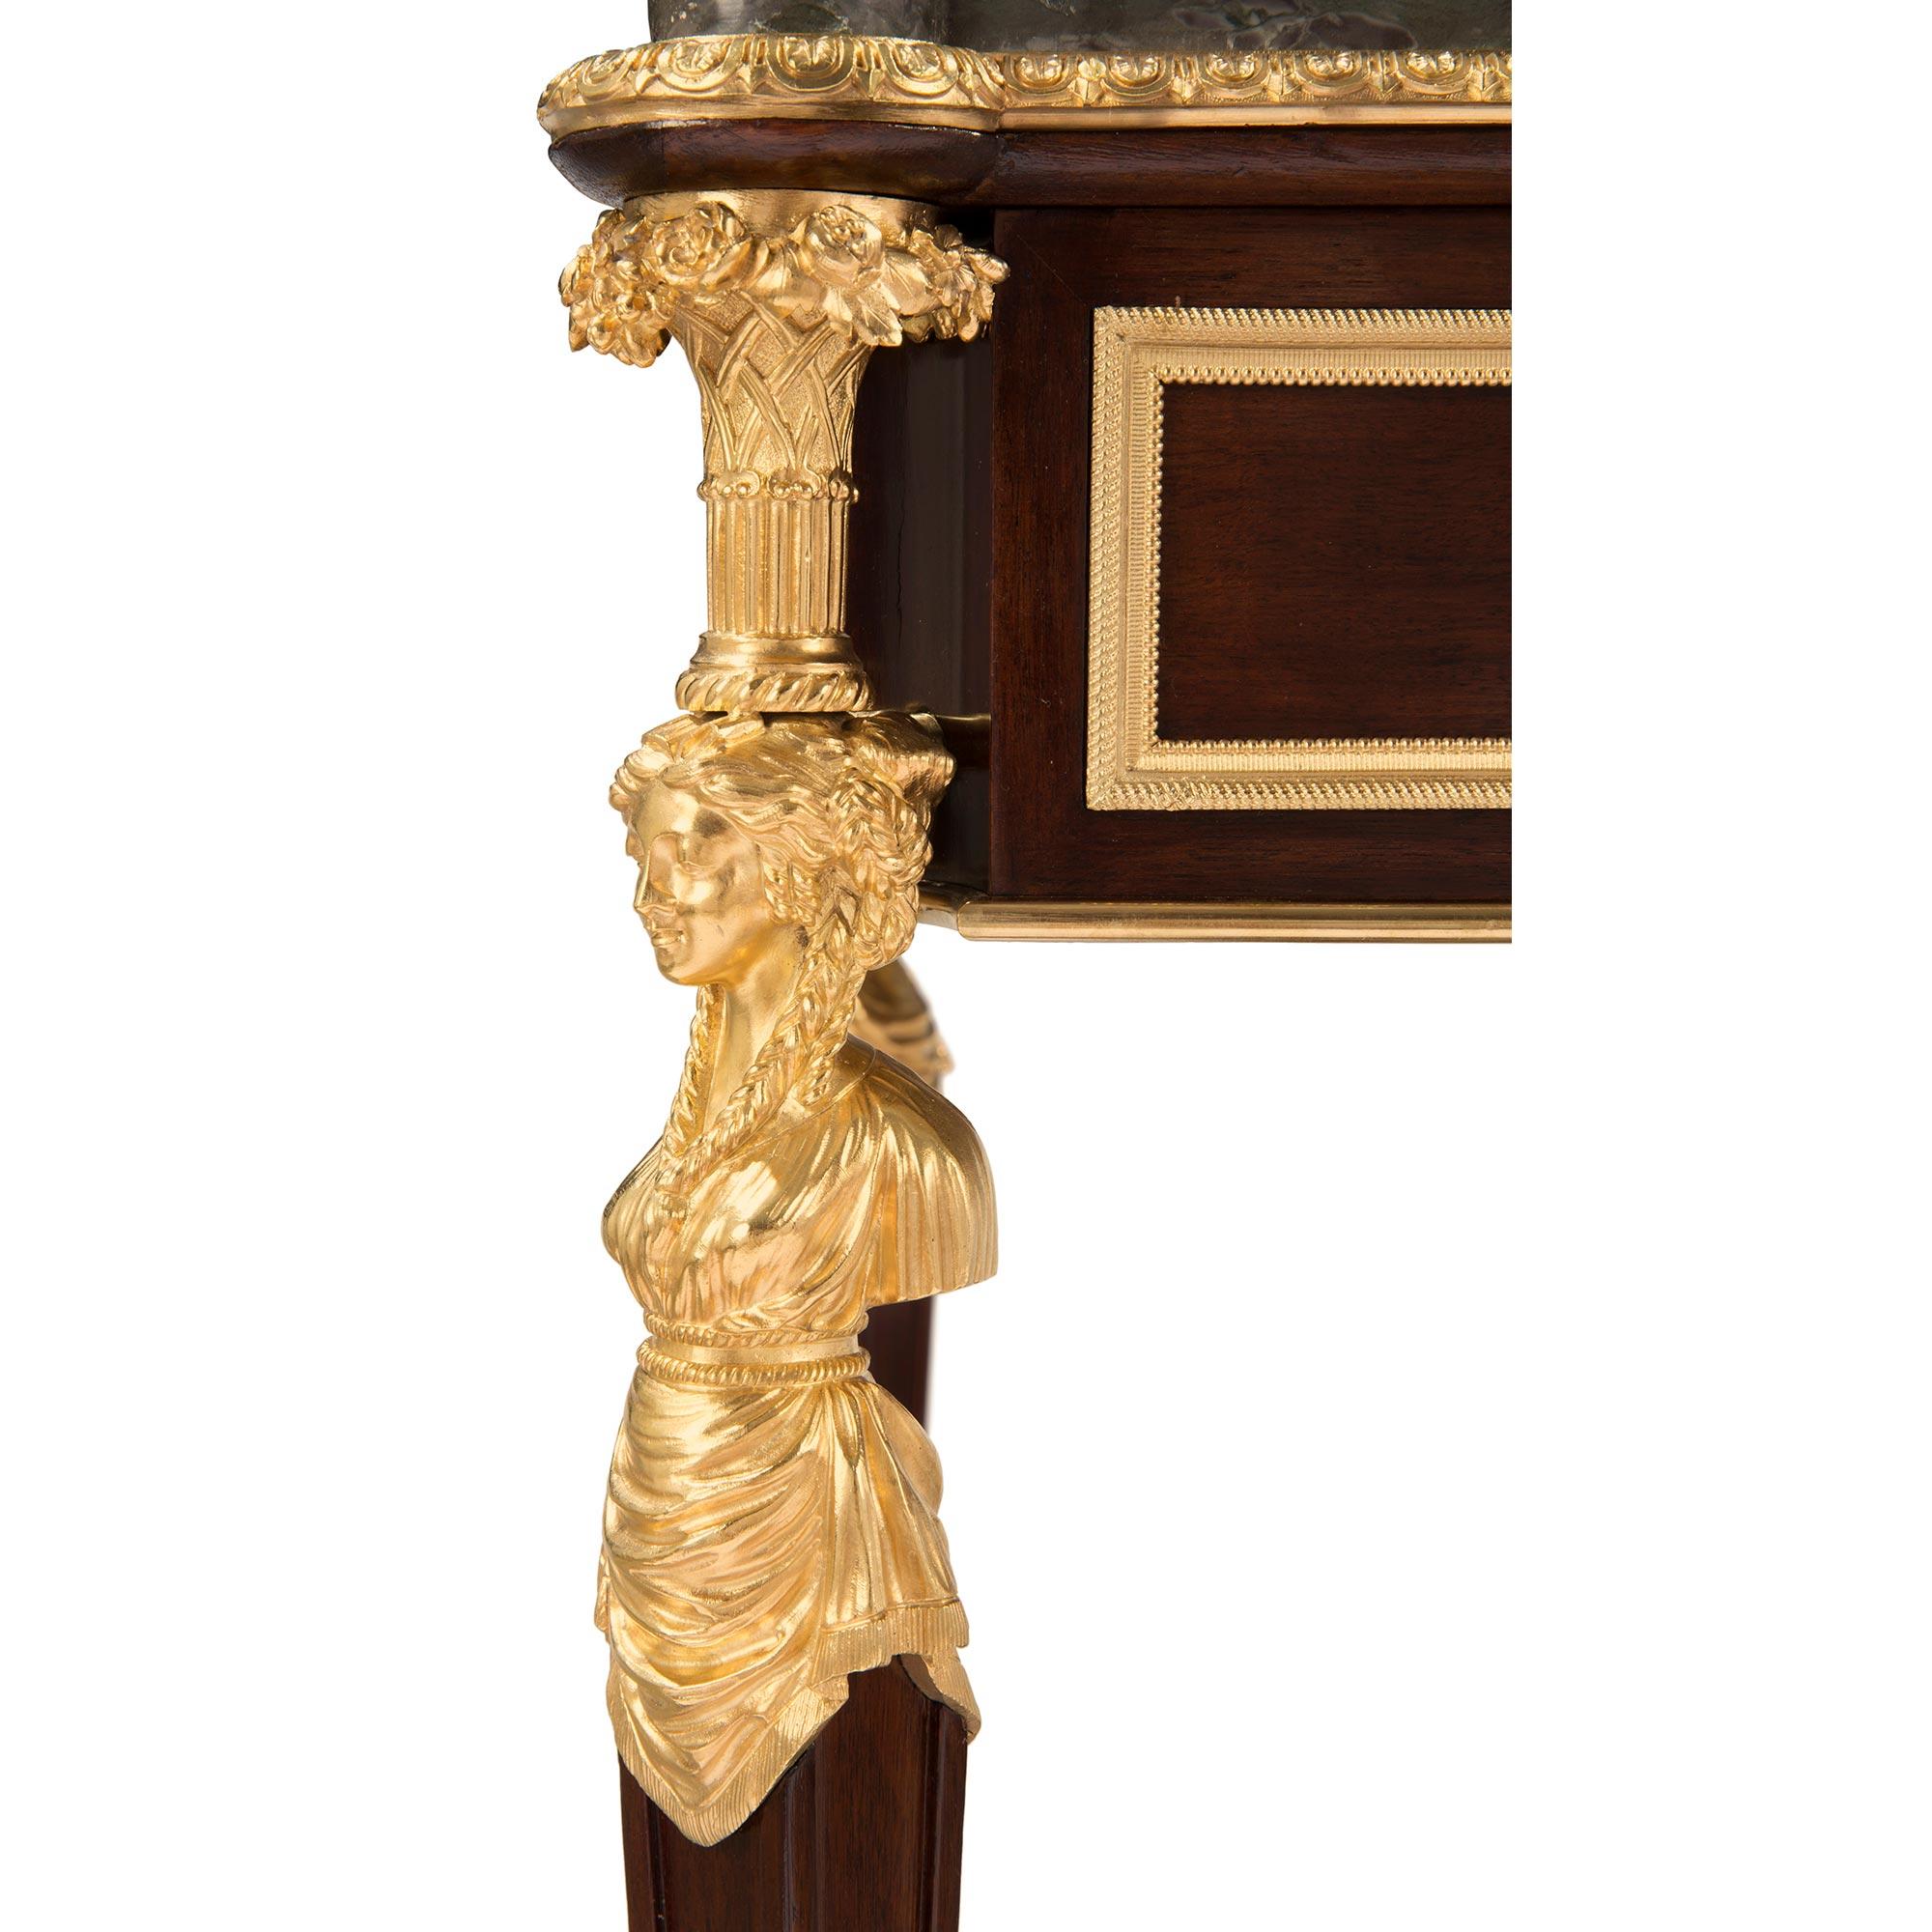 French 19th Century Mahogany, Ormolu and Marble Table, Attributed to Dasson For Sale 2